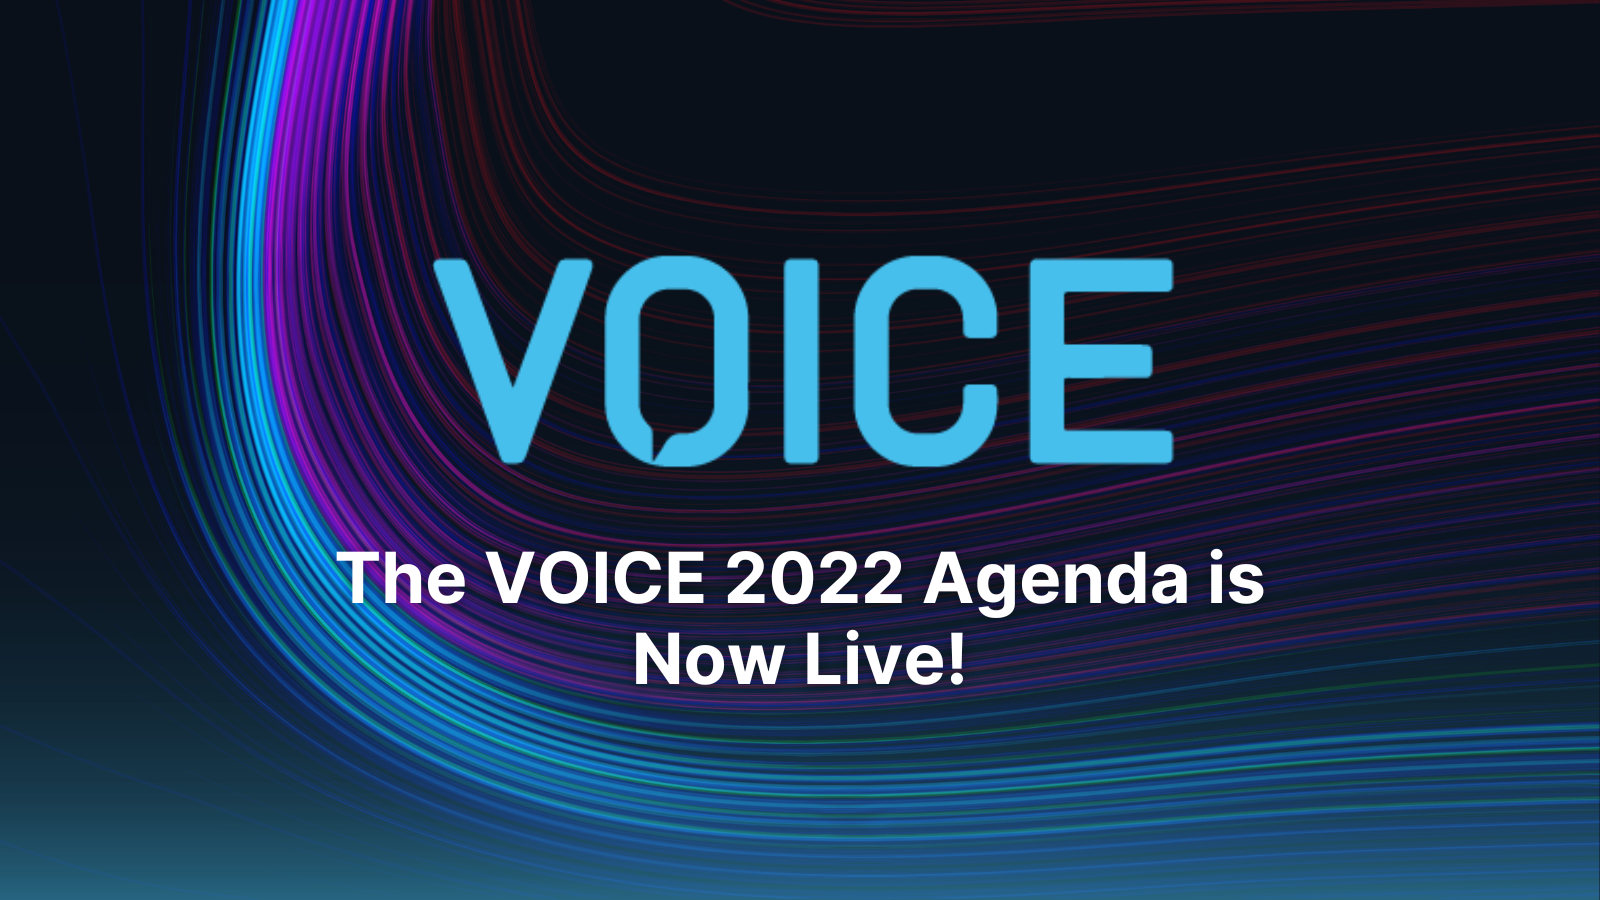 The VOICE 2022 Agenda is Now Live!